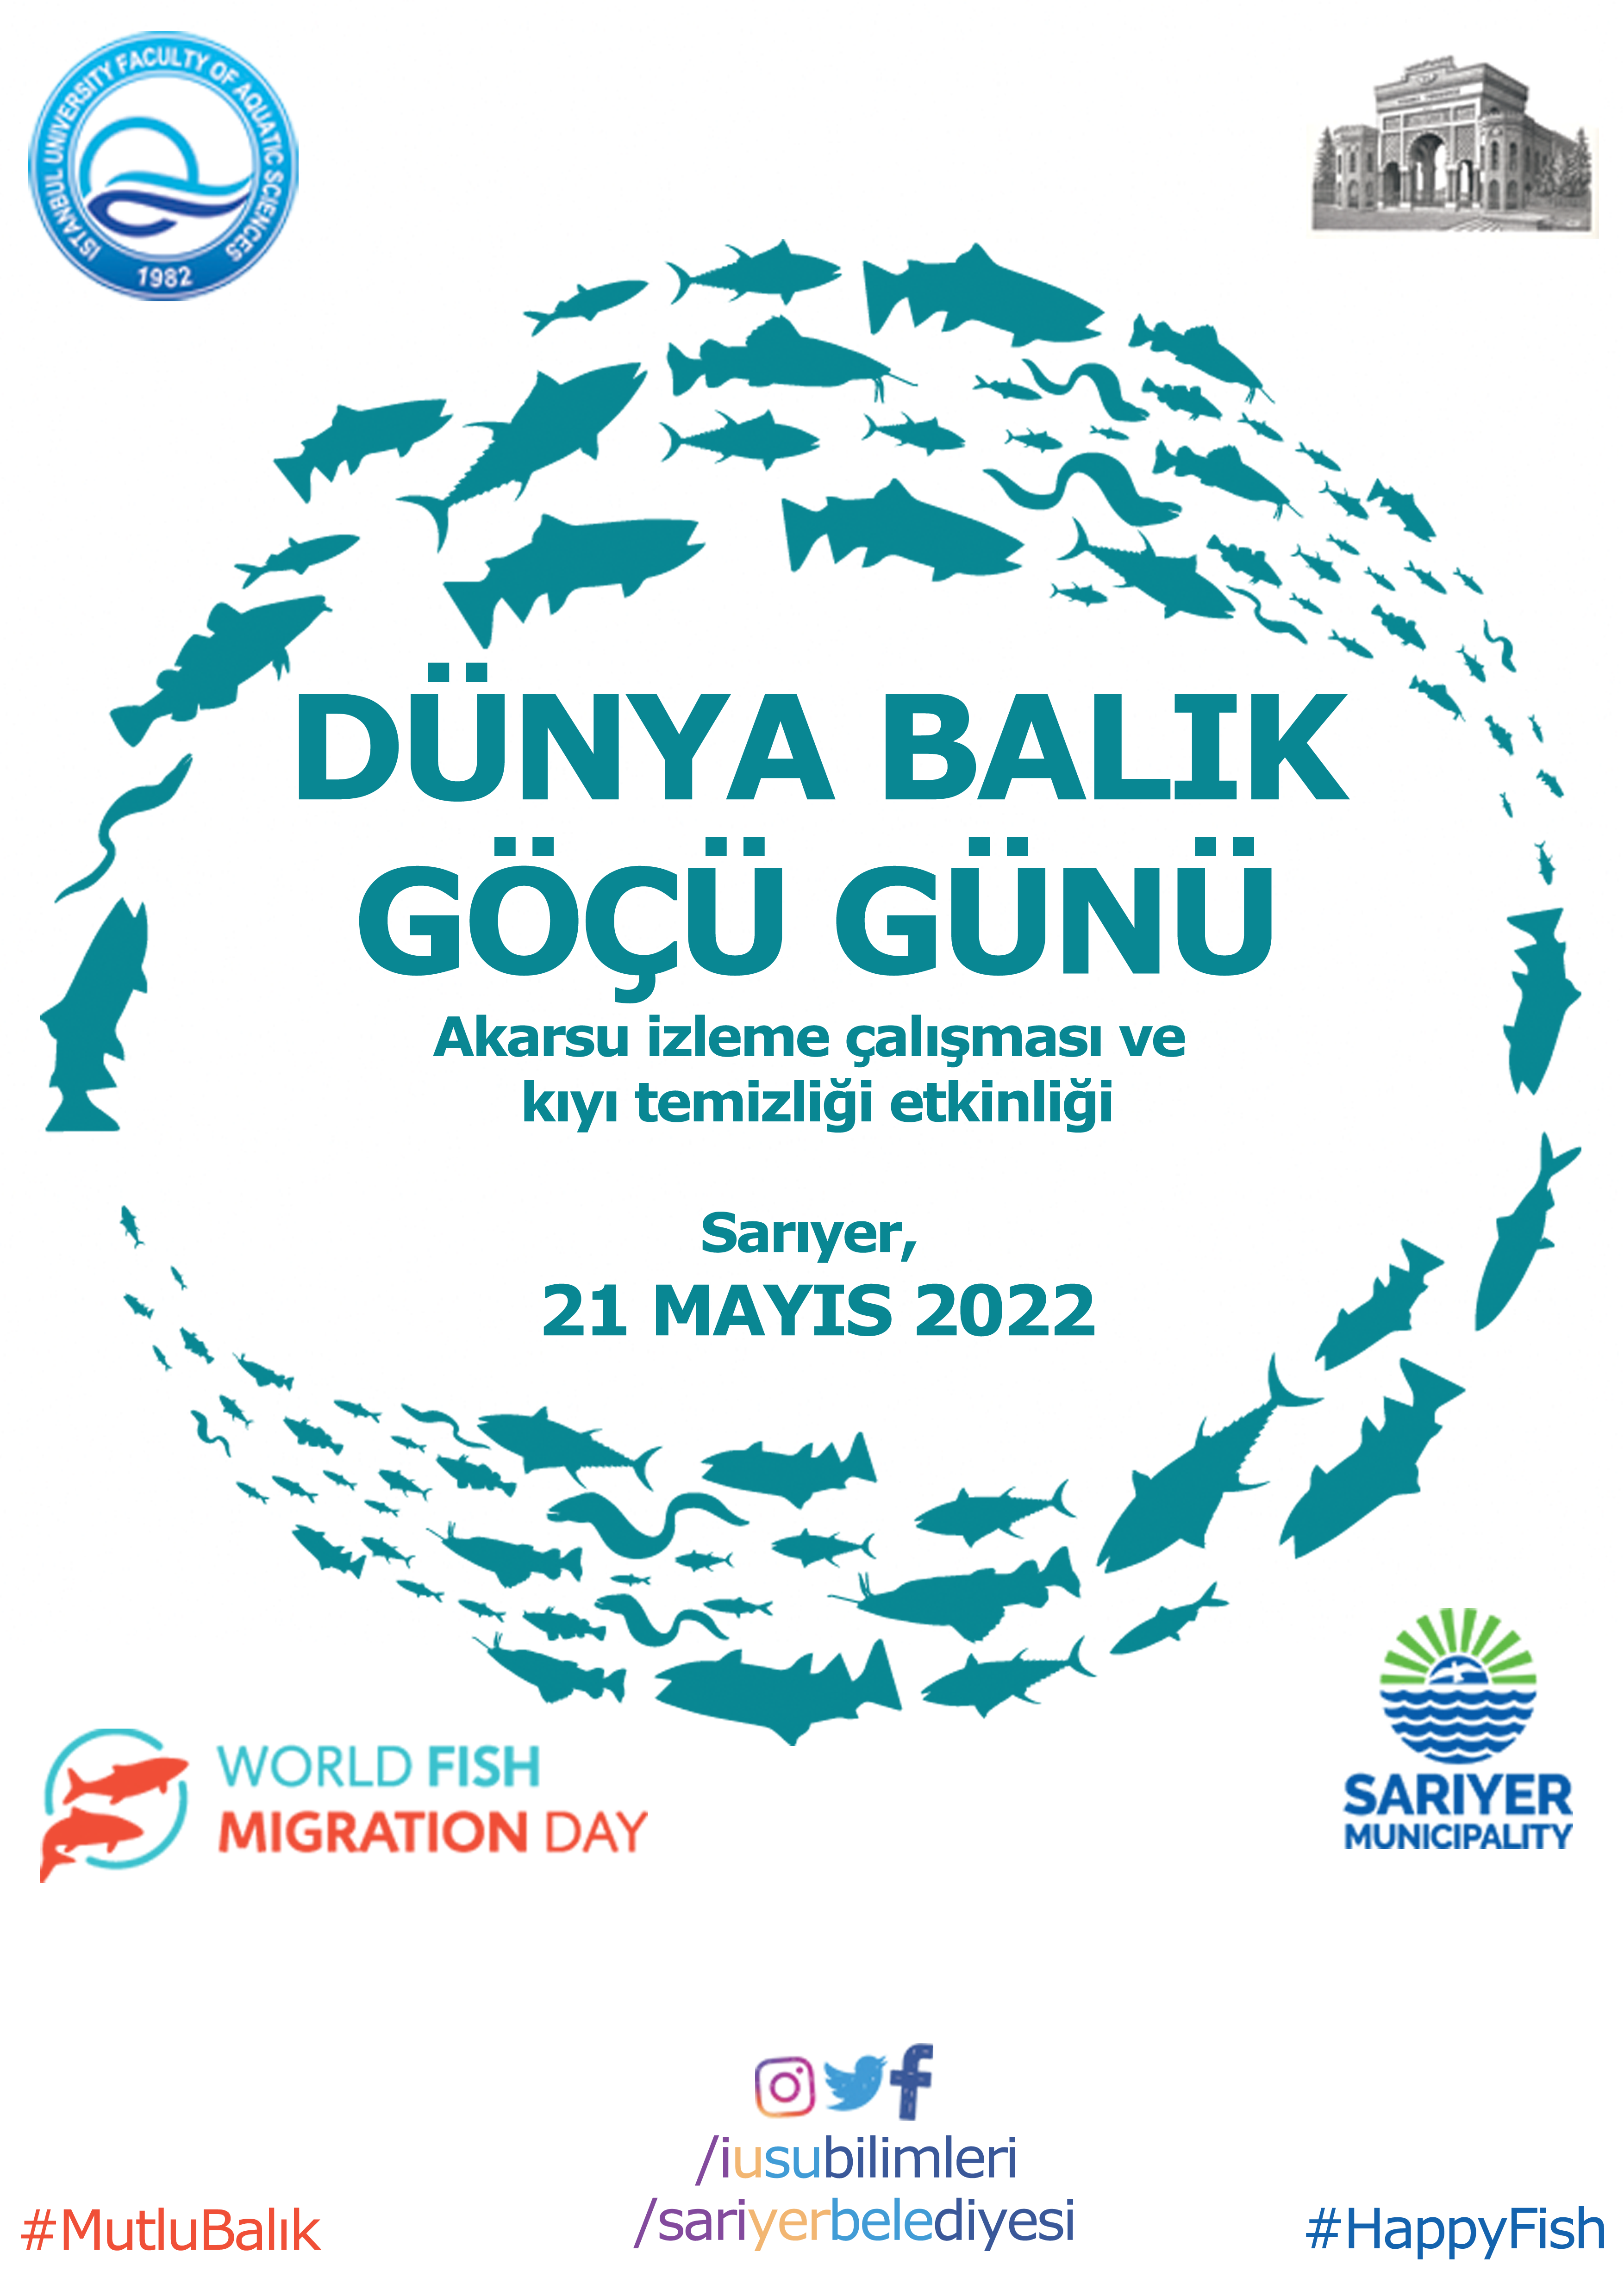 Istanbul University Faculty of Aquatic Sciences and Sariyer Municipality celebrating WFMD!